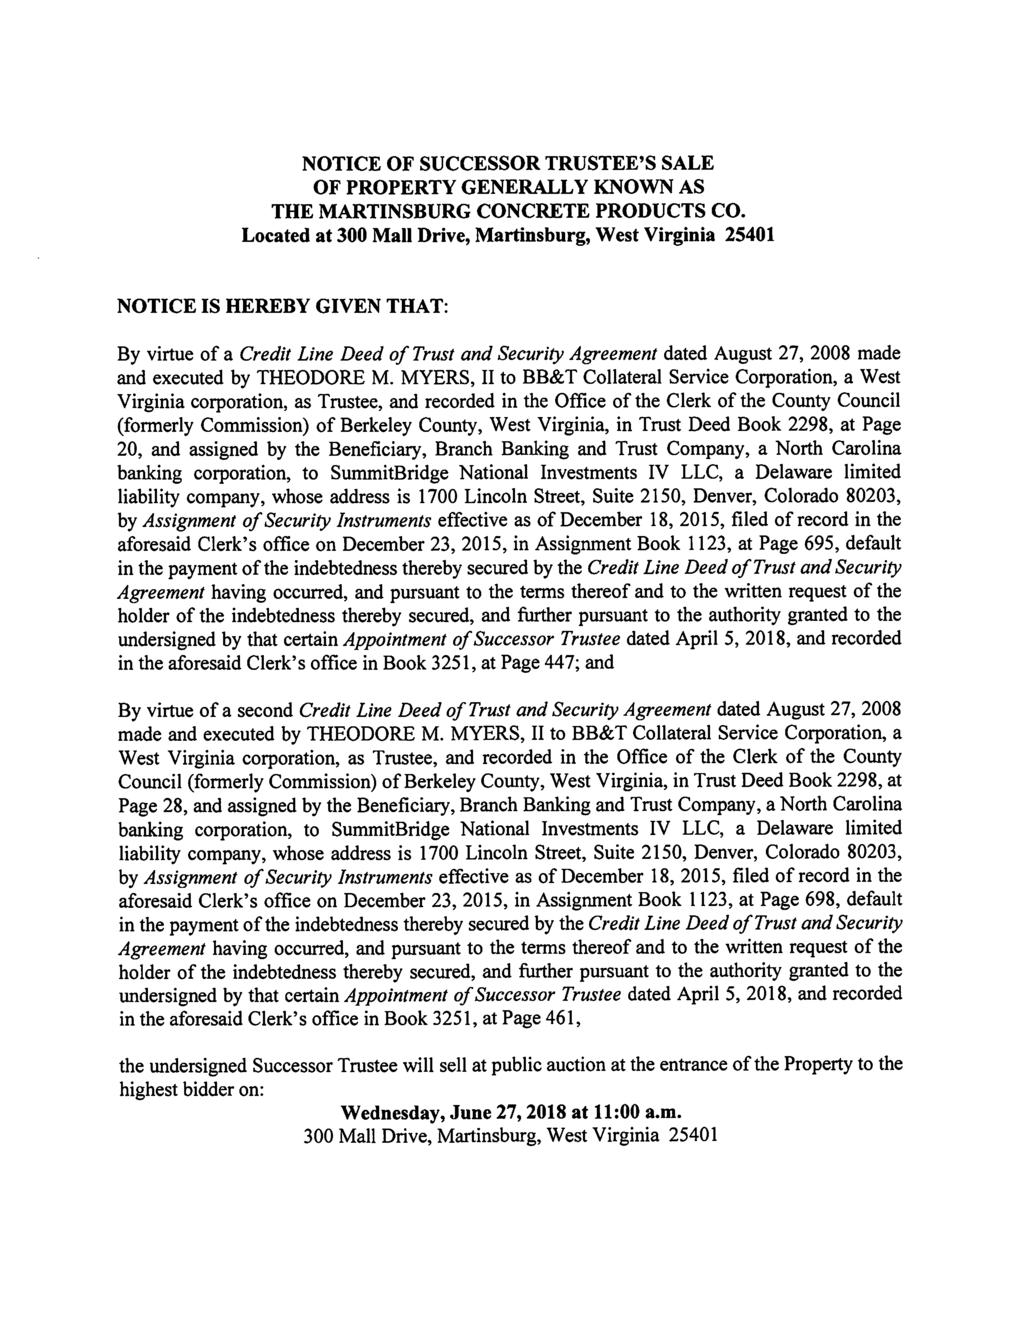 NOTICE OF SUCCESSOR TRUSTEE'S SALE OF PROPERTY GENERALLY KNOWN AS THE MARTINSBURG CONCRETE PRODUCTS CO.